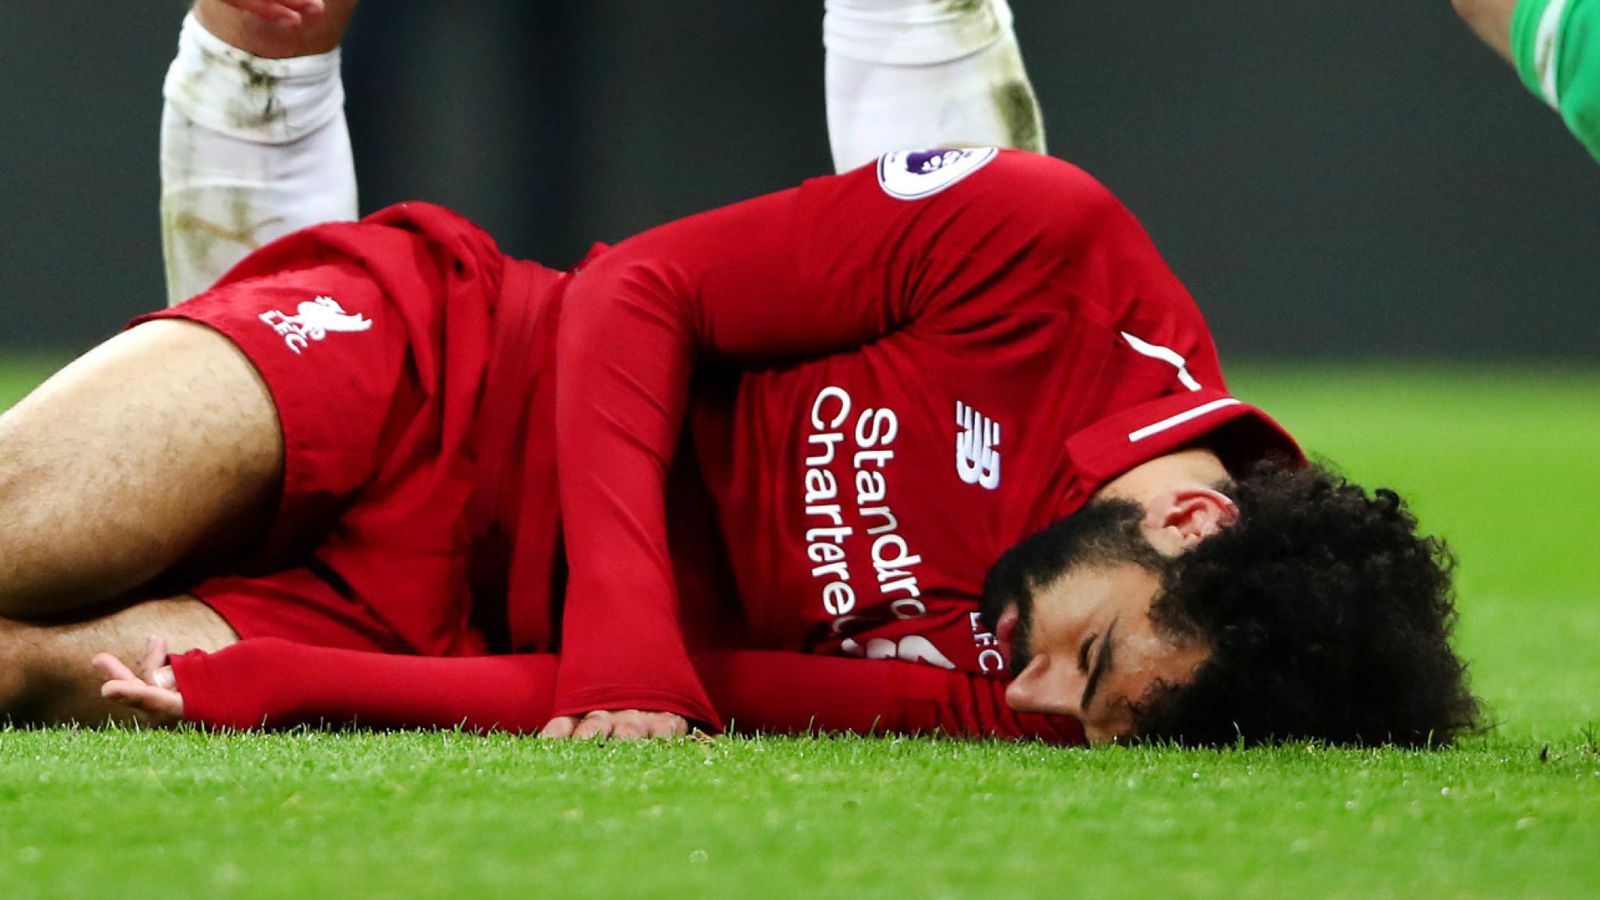 Salah, Firmino out of Barca vs Liverpool tie with injuries